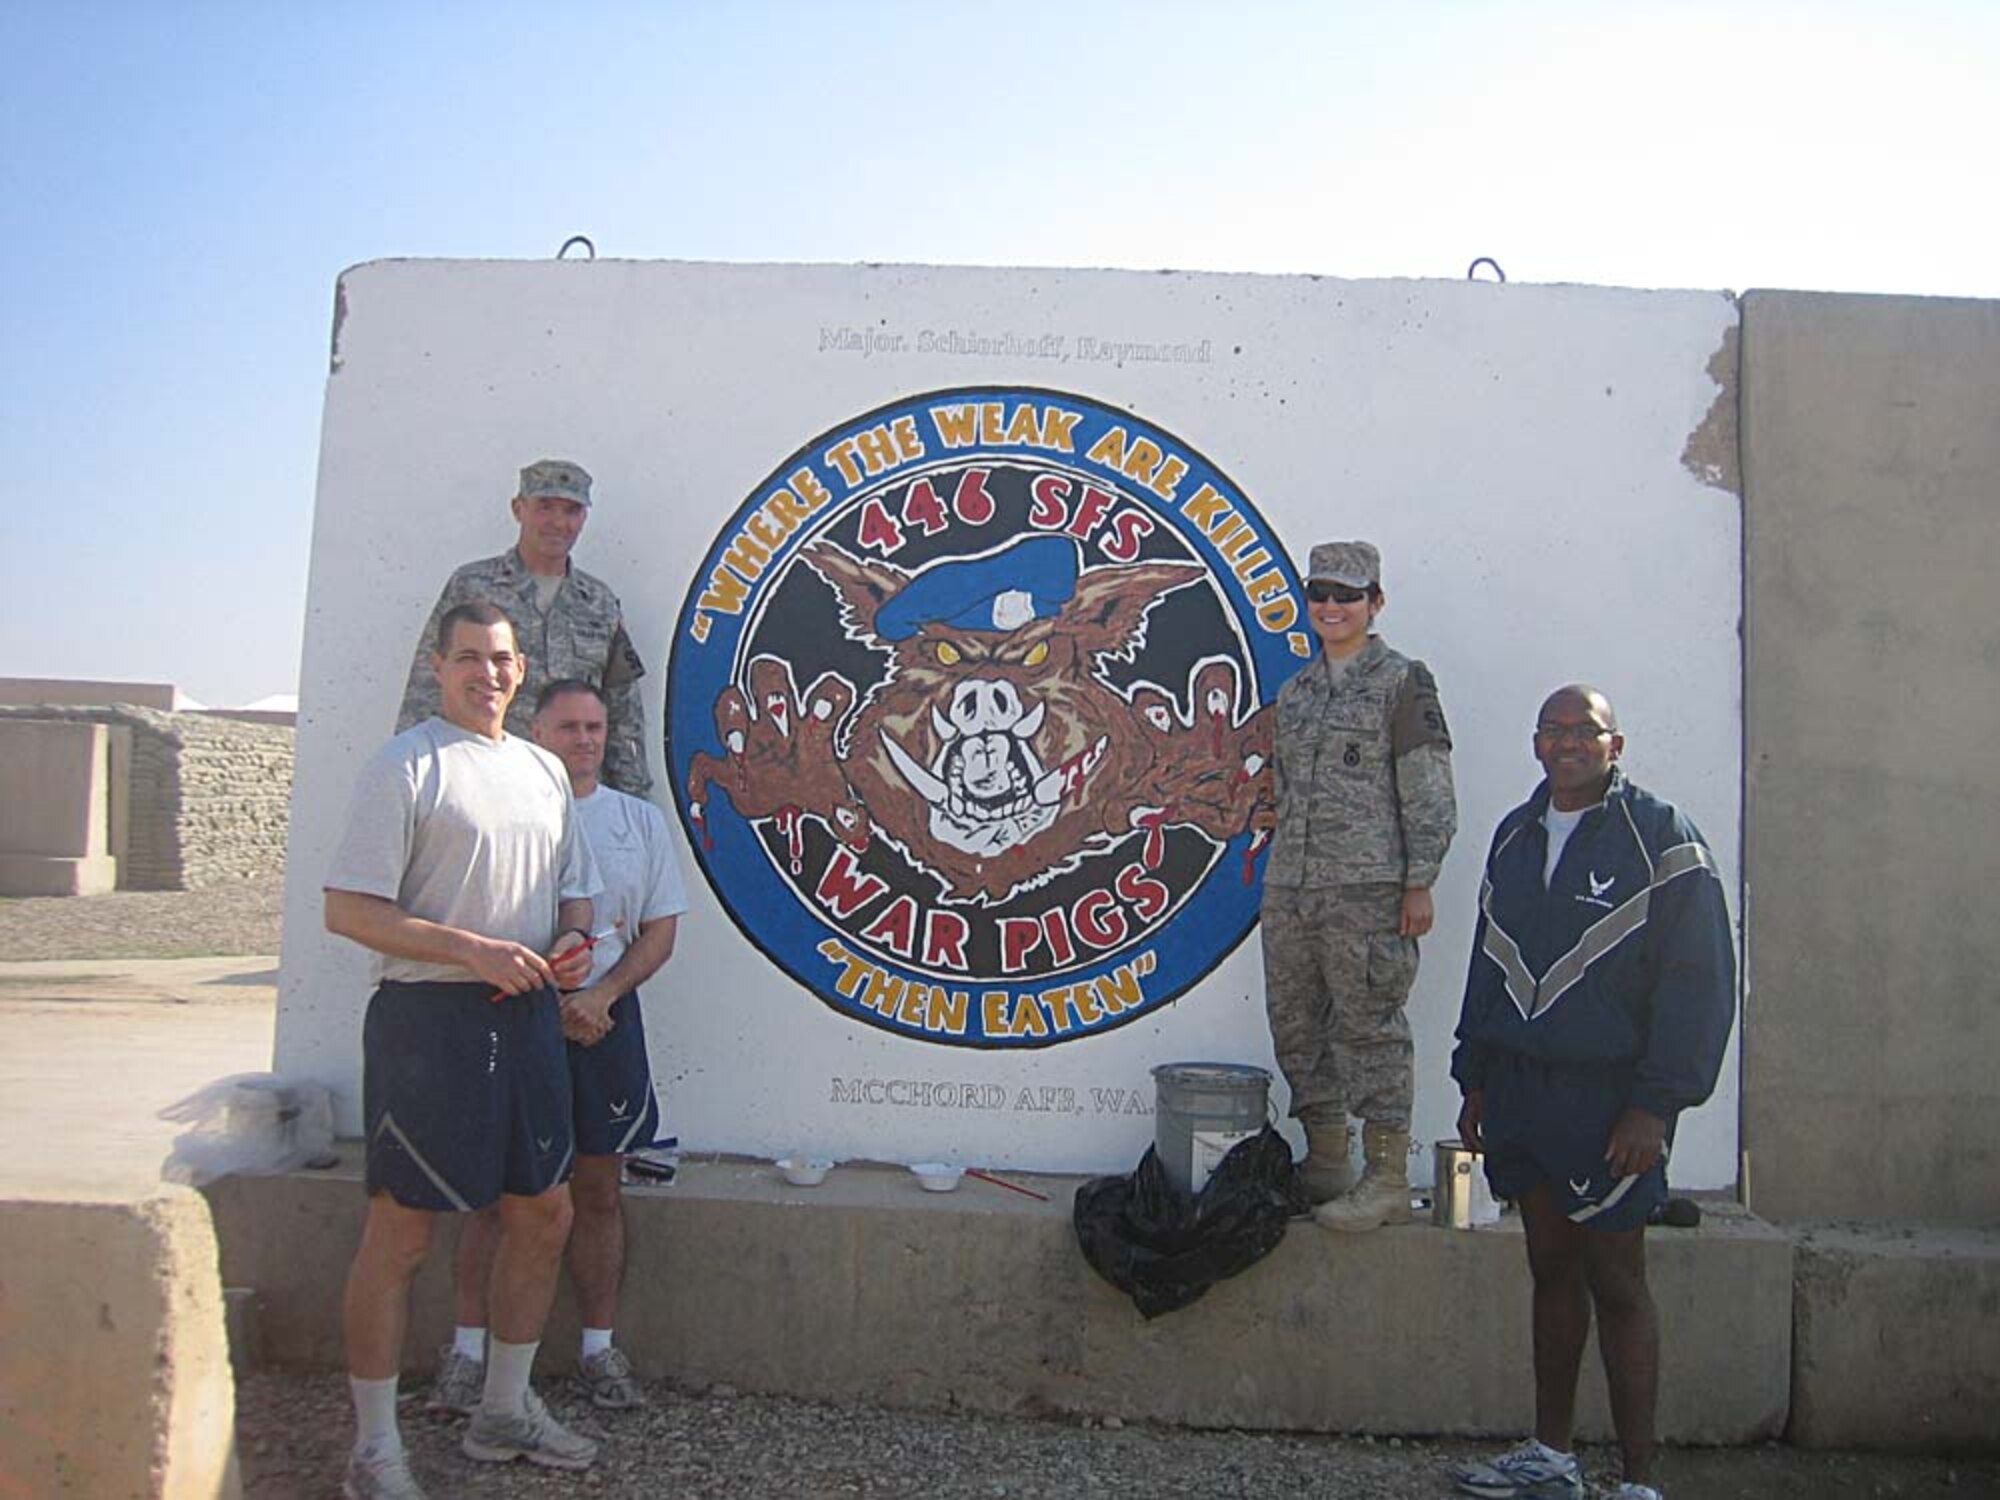 KIRKUK REGIONAL AIR BASE, Iraq - Leaving their mark with a painting of the 446th Security Forces Squadron's Warpig coin at Kirkuk RAB are Tech. Sgt. John Wulff, Tech. Sgt. Mike Lefrancis, Maj. Ray Schierhoff, Master Sgt. Carlos Duell, and Senior Airman Grace Perez, all from McChord Air Force Base, Wash.  The Reserve security forces Airmen are halfway through their six-month deployment with the 506th Expeditionary Security Forces Squadron. (Courtesy photo)